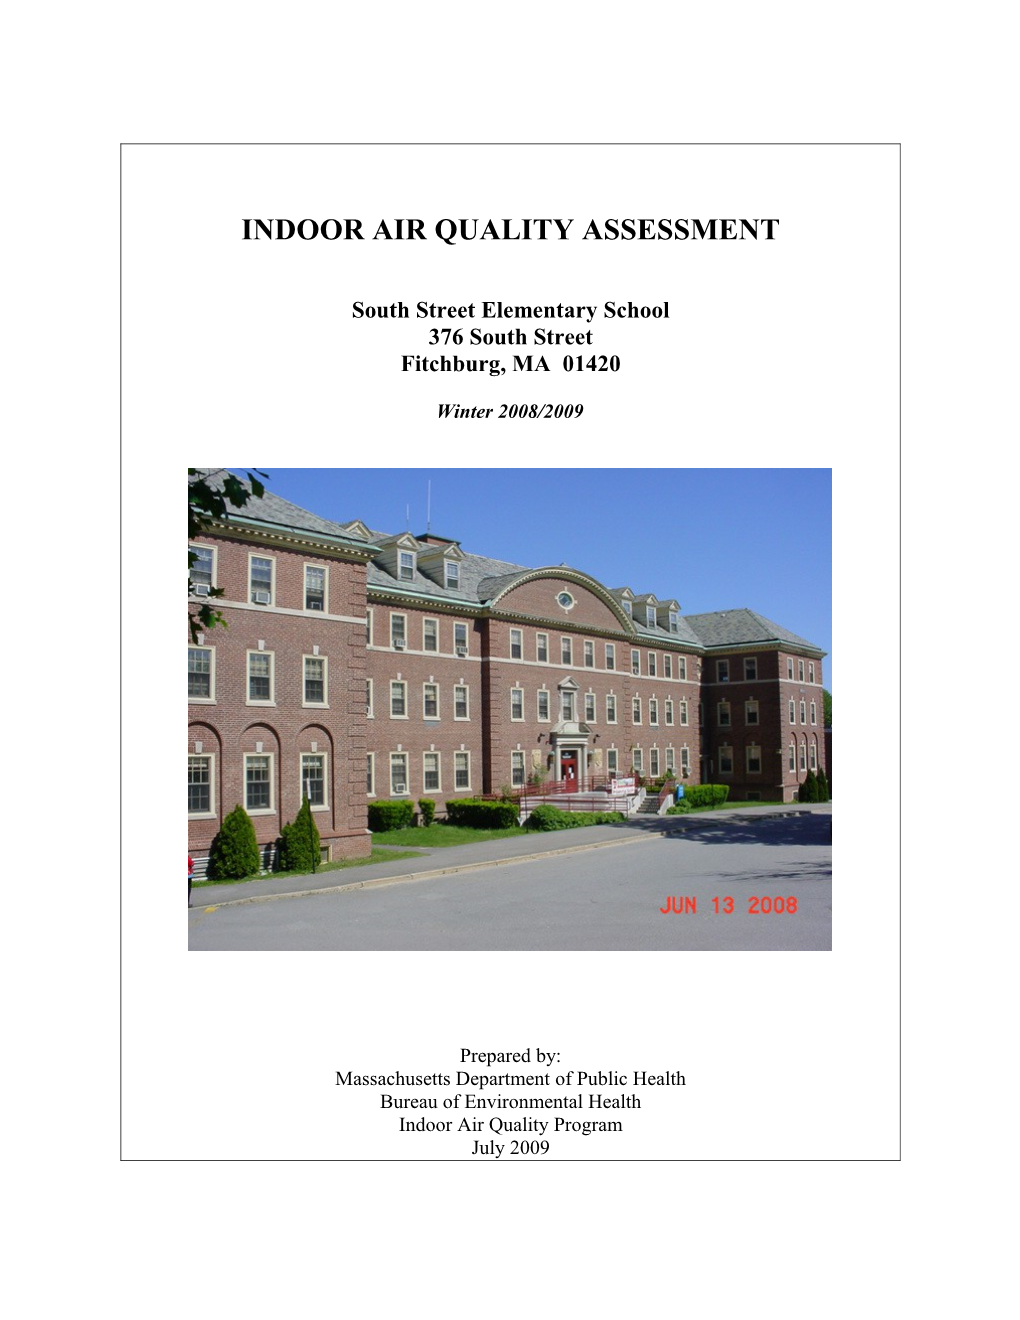 INDOOR AIR QUALITY ASSESSMENT - South Street Elementary School, 376 South Street